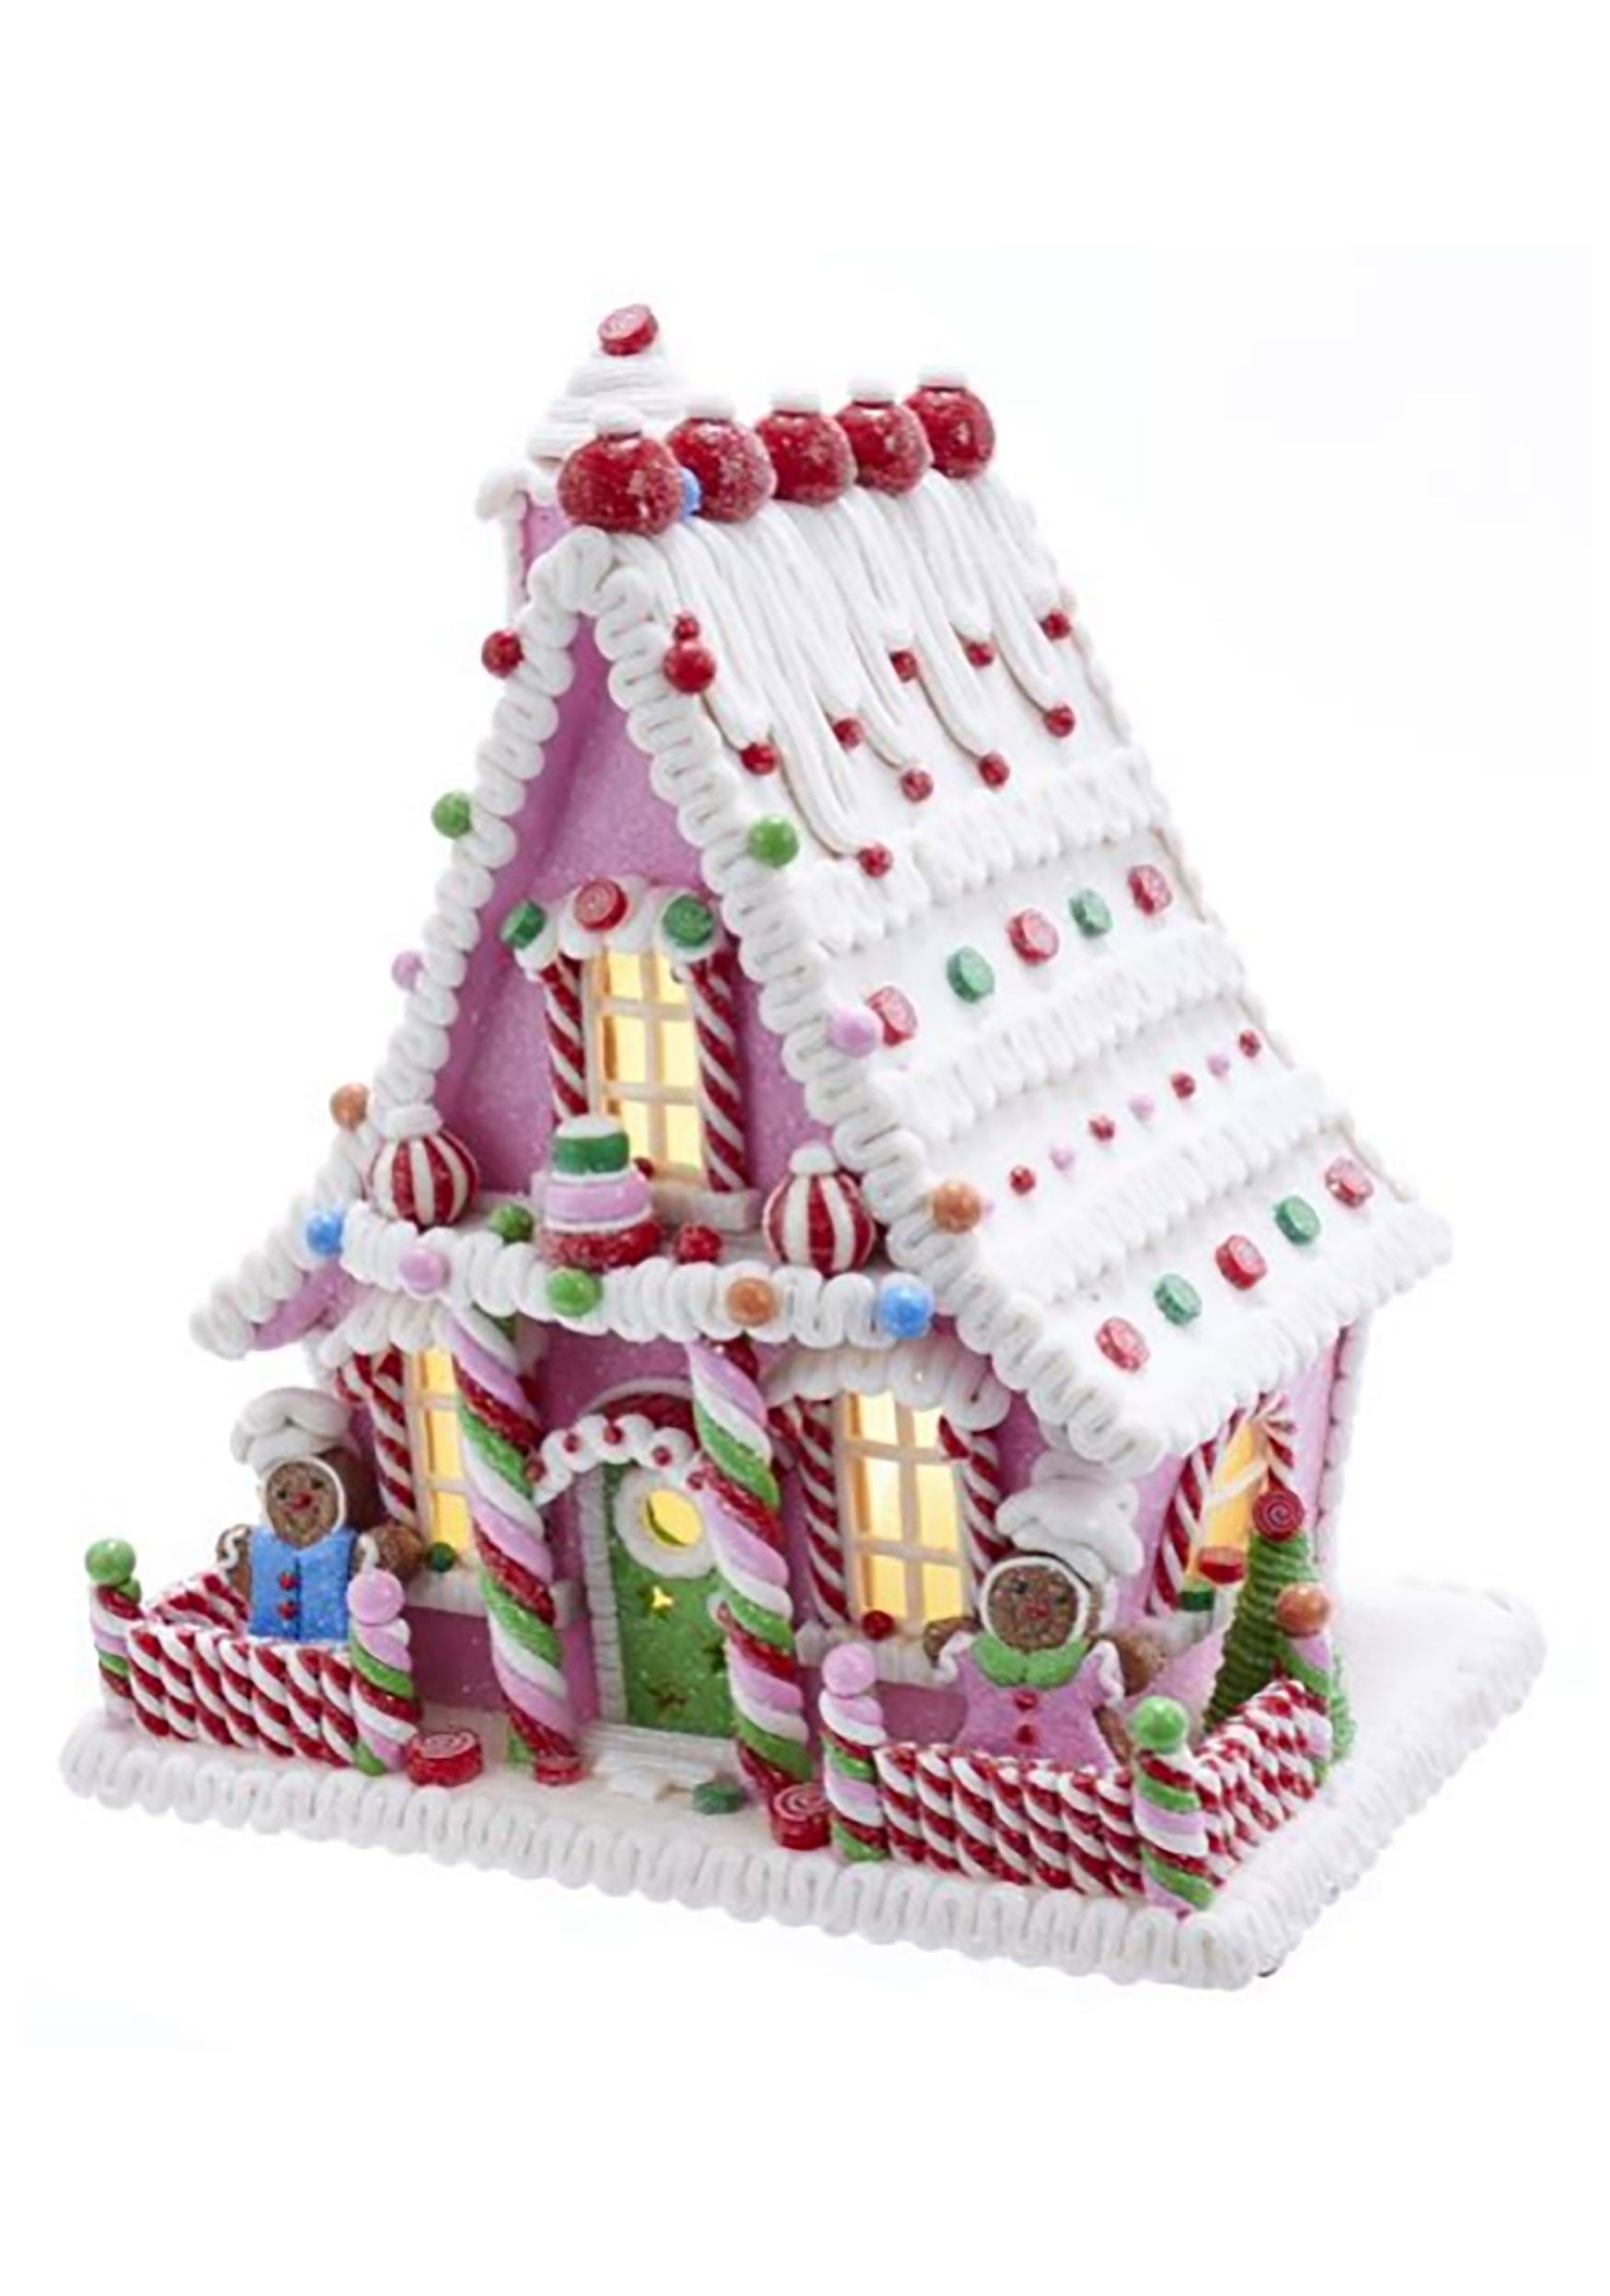 LED Light And Timer Candy Gingerbread House